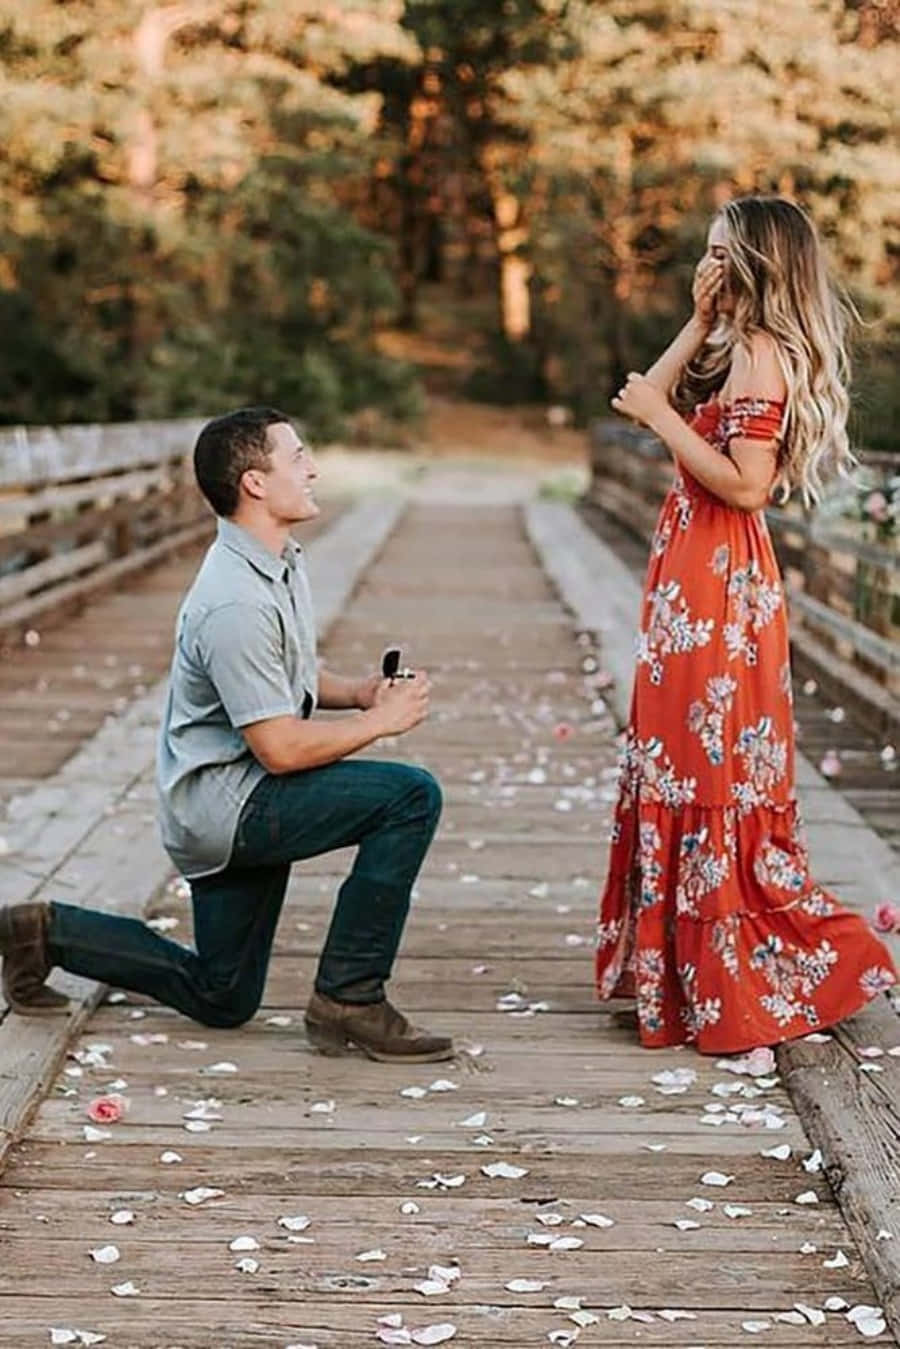 Make this moment last forever with a special proposal